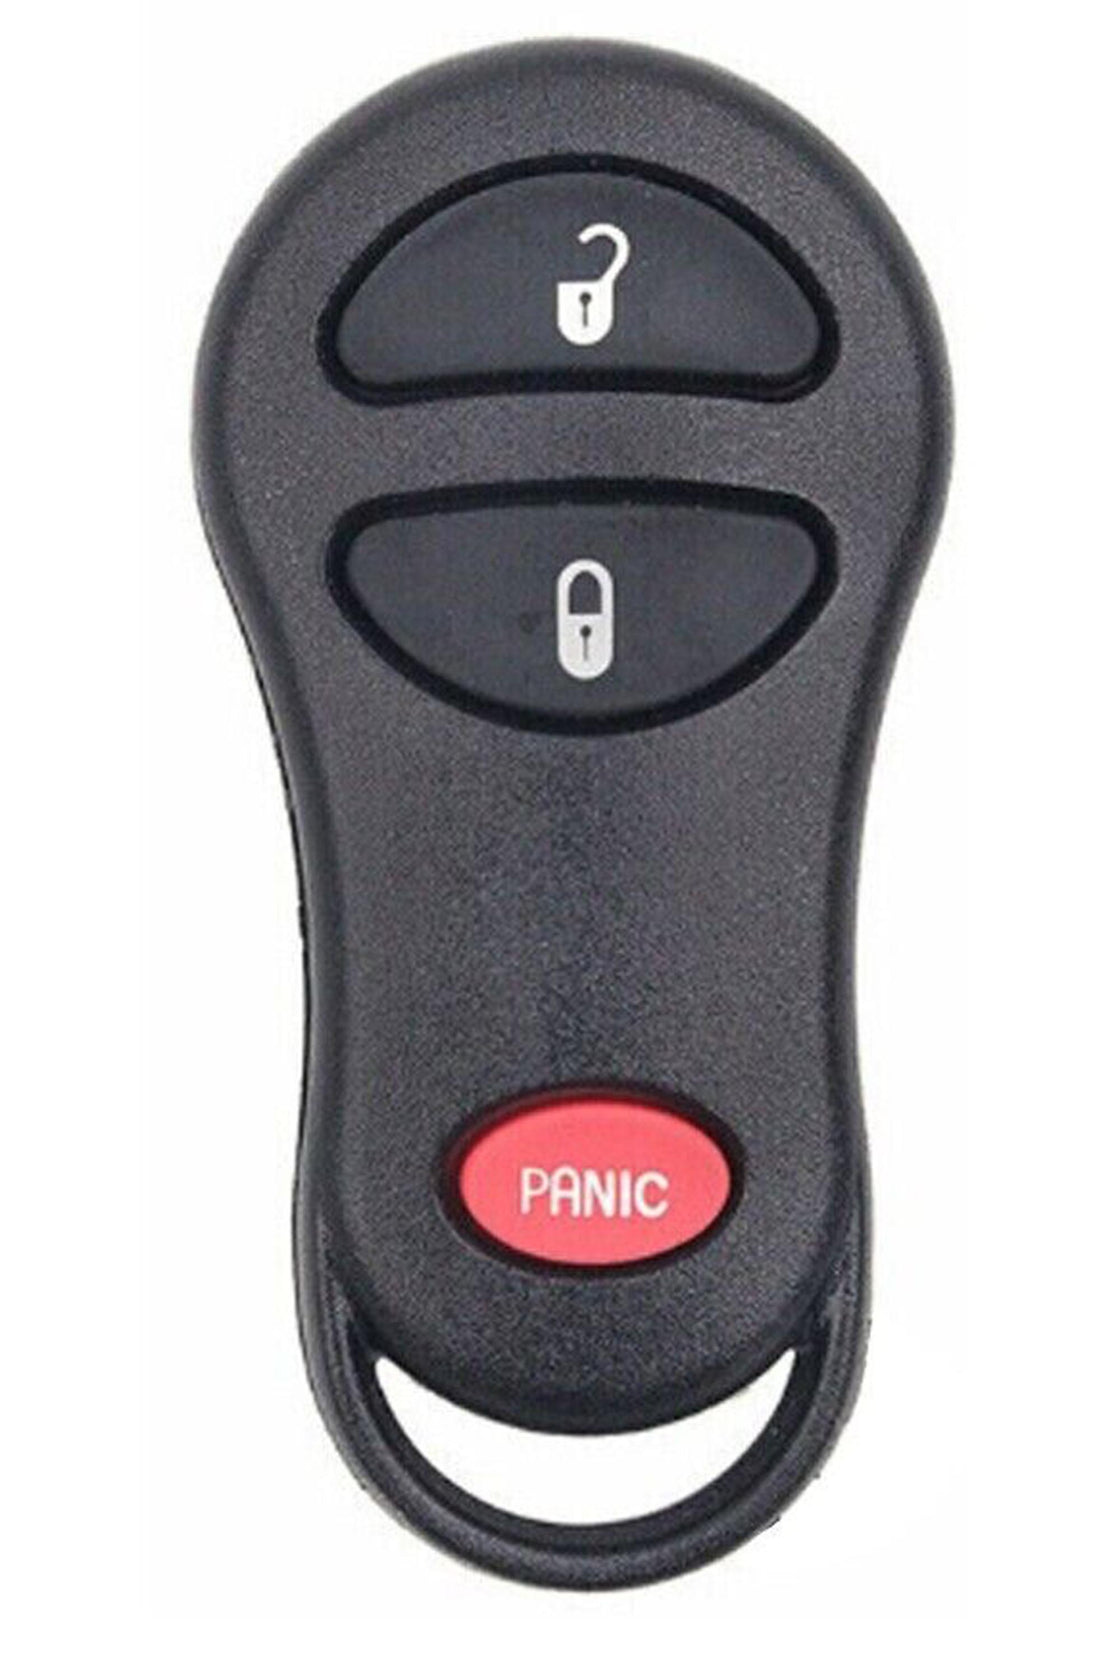 1x New Replacement Remote Key Fob For Chrysler Dodge Plymouth